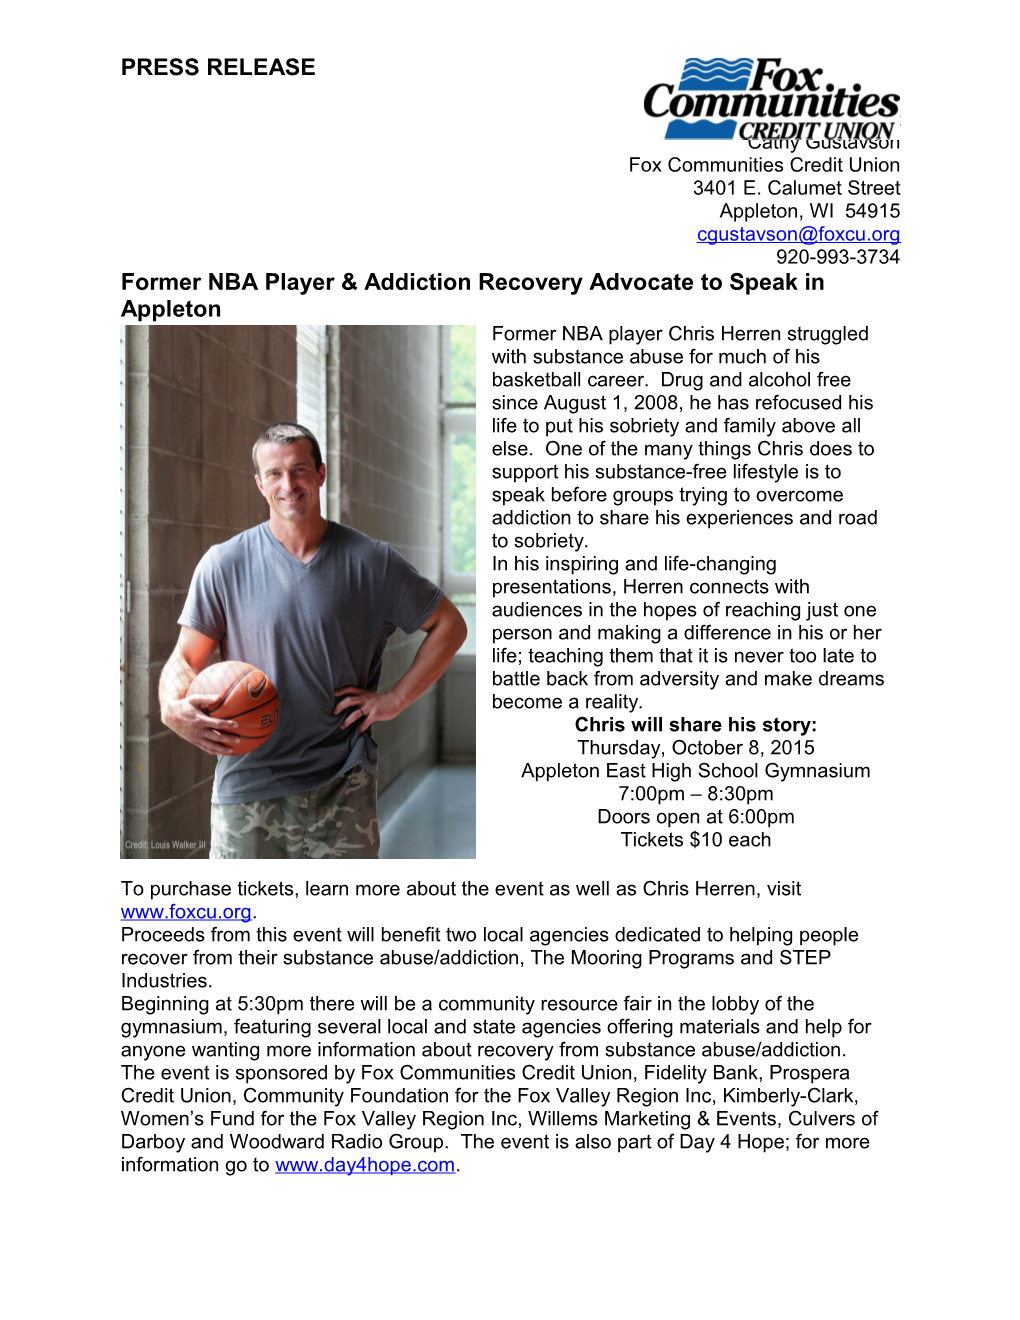 Former NBA Player & Addiction Recovery Advocate to Speak in Appleton